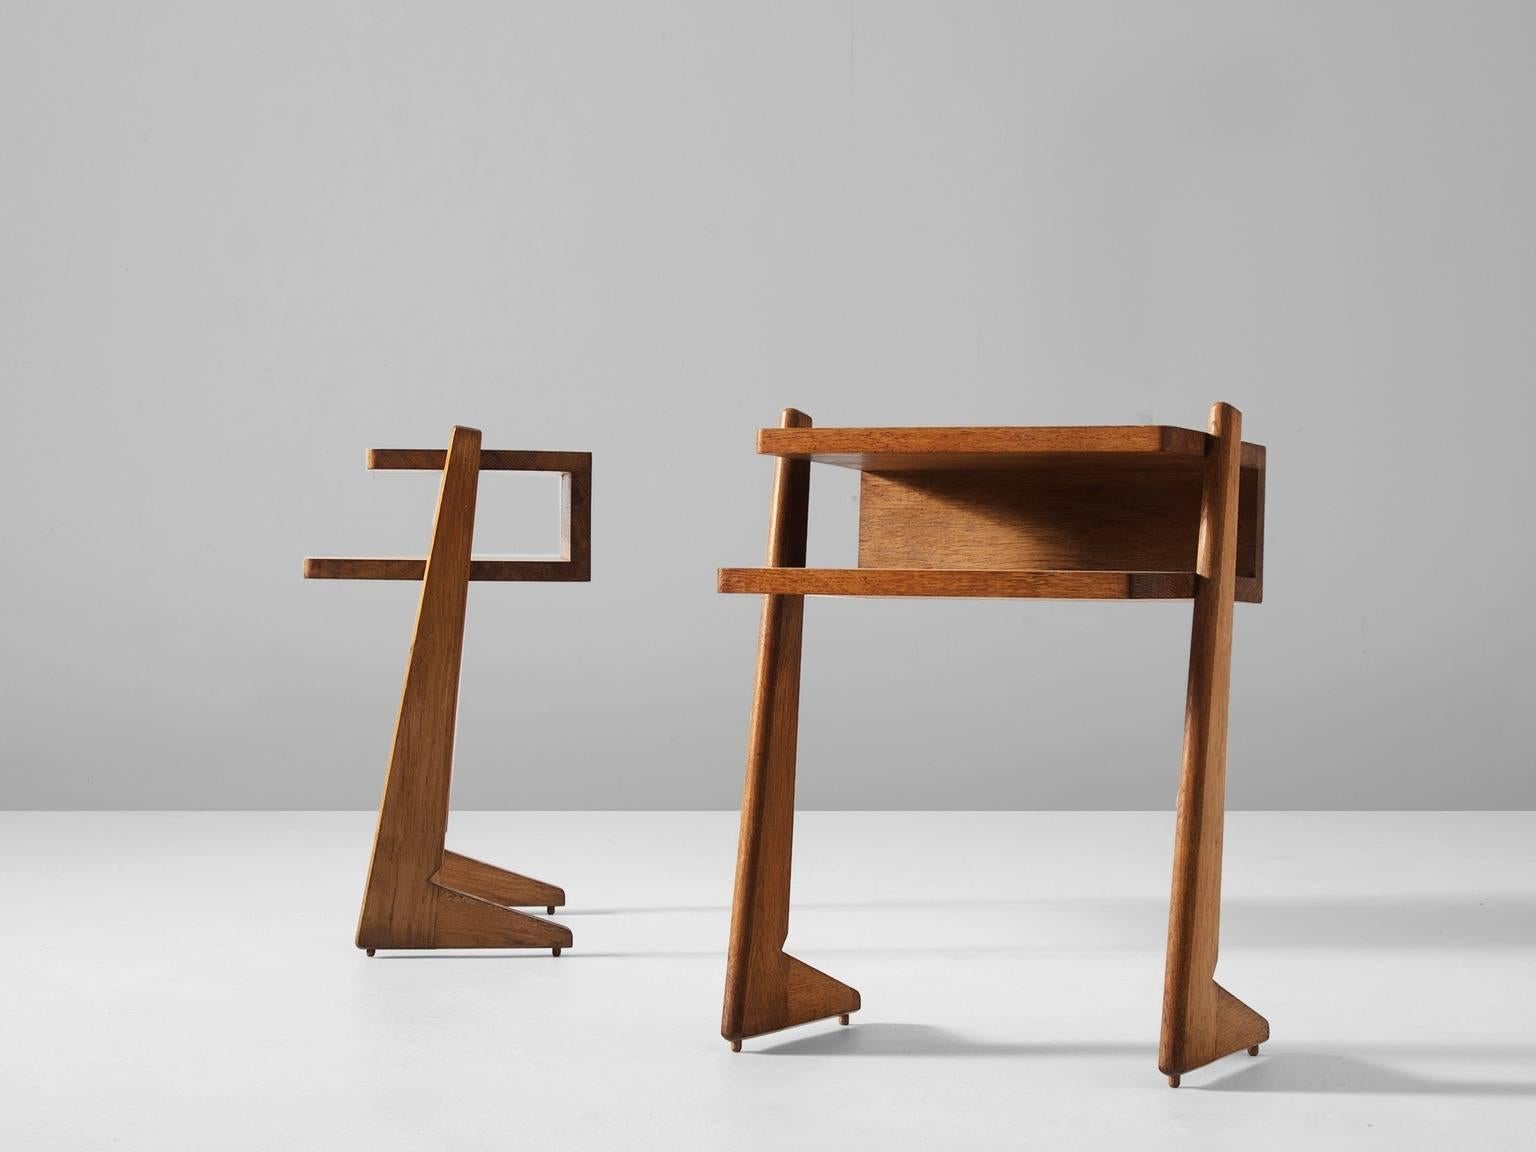 Pair of nightstands, in solid oak, by Guillerme et Chambron, France, 1960s.

Two nightstands in solid oak. Playful design with two levels. Rectangular Dual level top with two L-shaped legs. These stands provide an open and fresh look. The solid